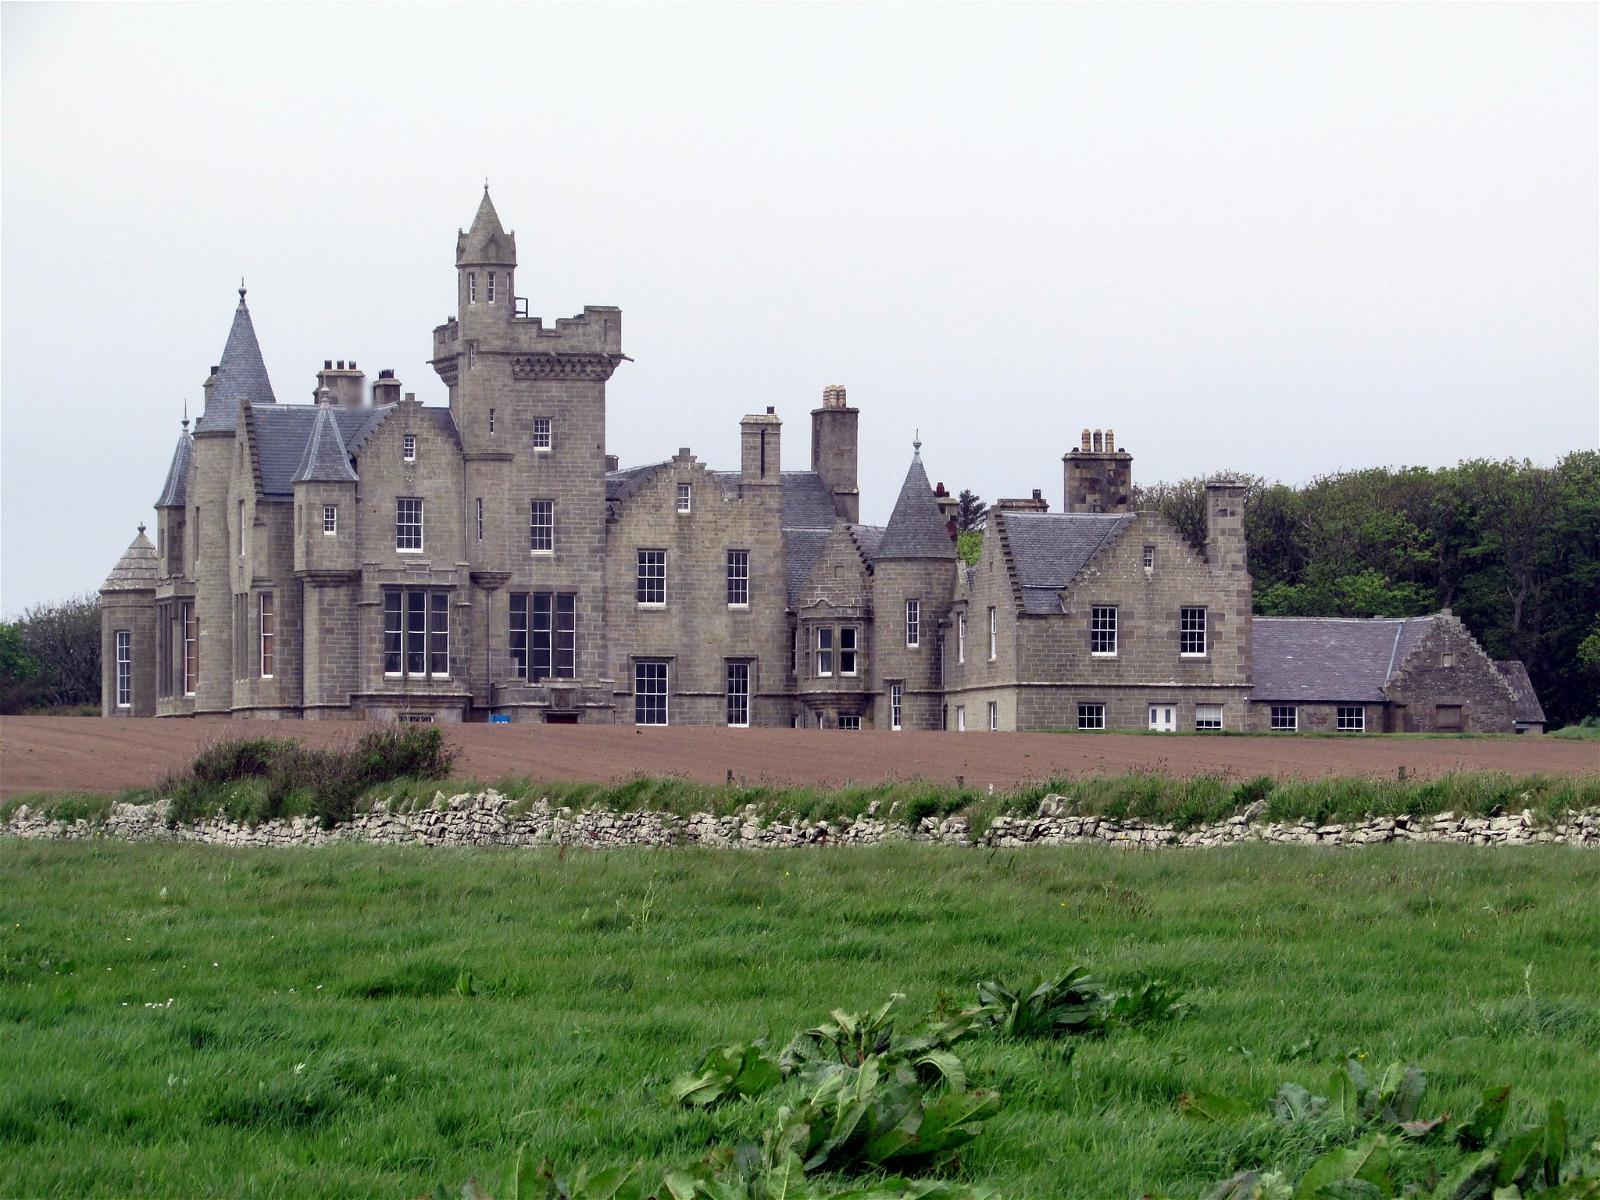 Image of Balfour Castle. castle orkney shapinsay